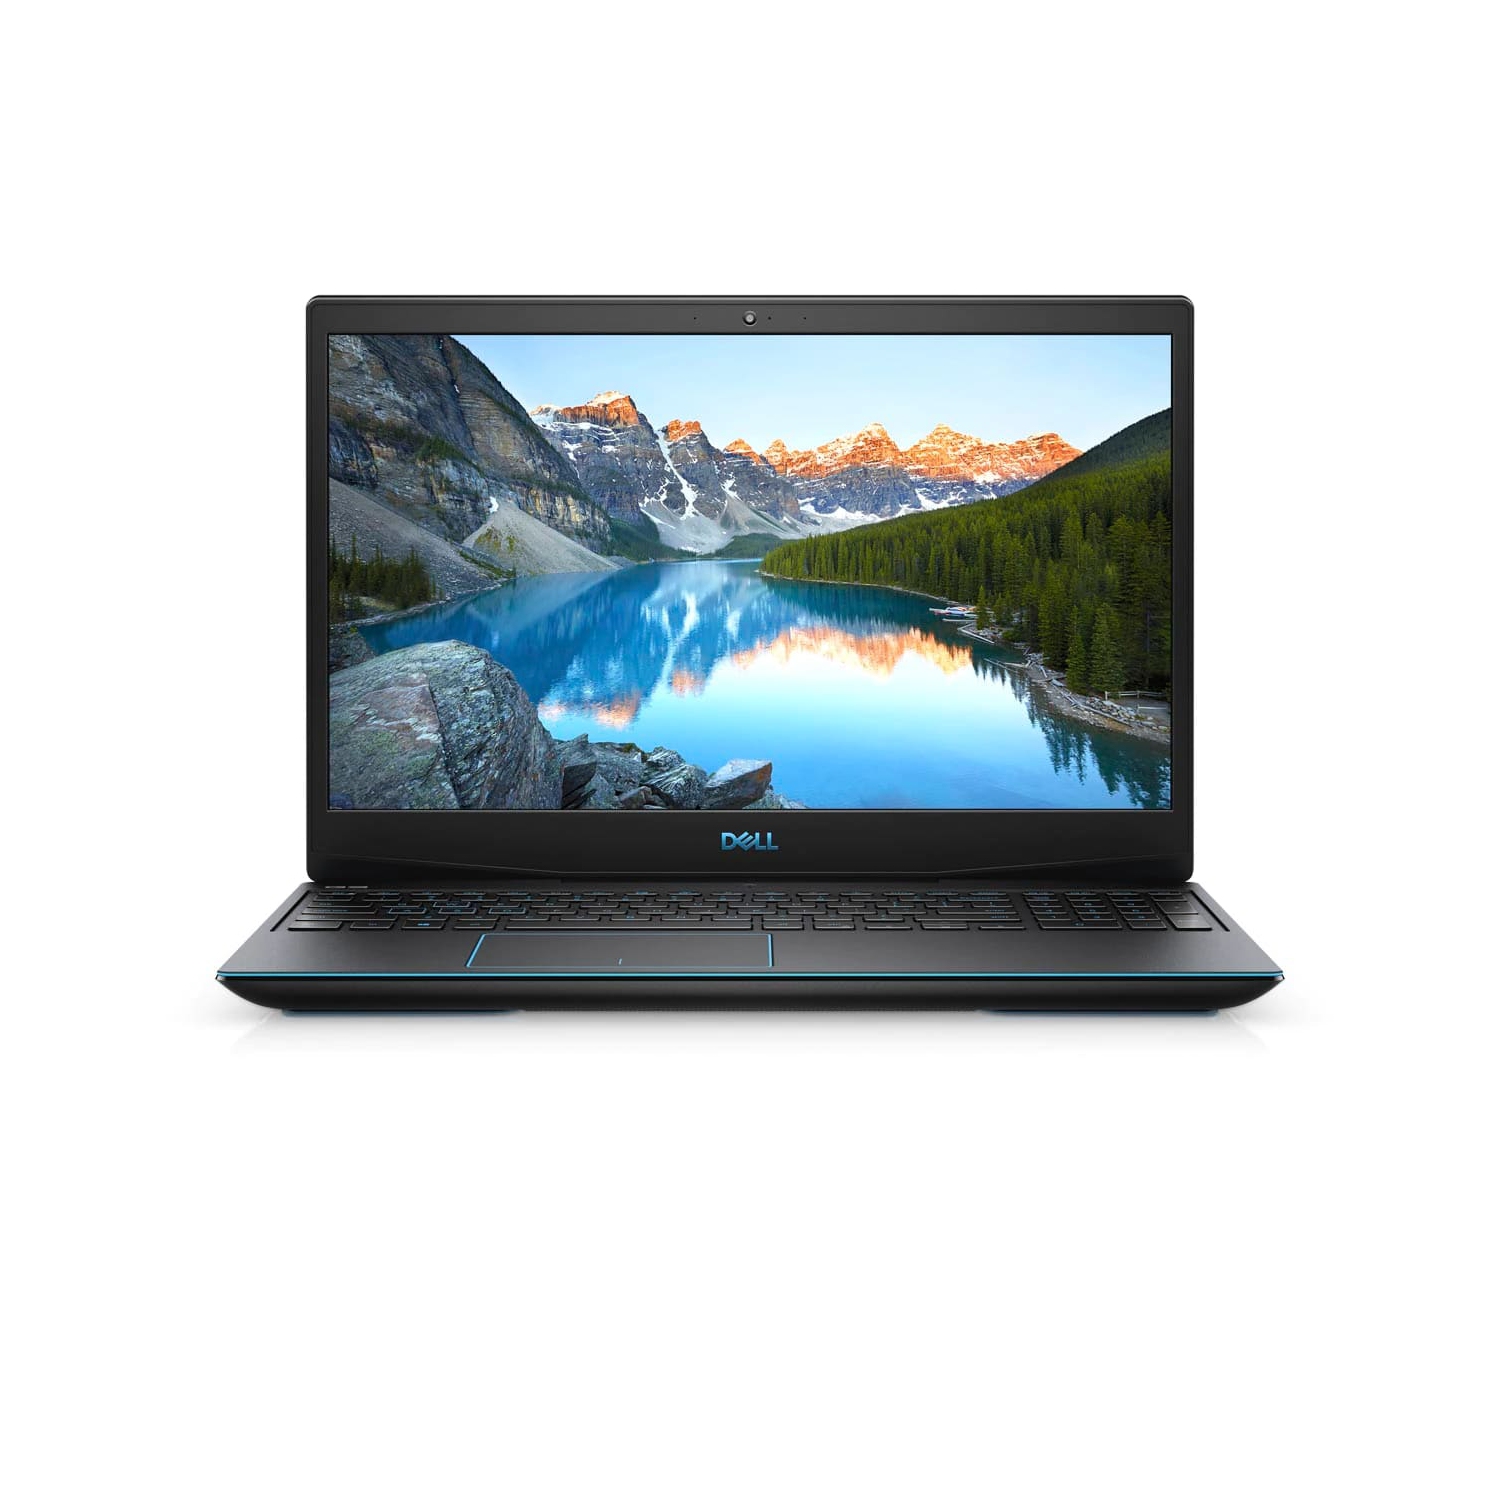 Refurbished (Excellent) - Dell G3 15 3590 Gaming Laptop (2019) | 15.6" FHD | Core i7 - 1TB HDD - 16GB RAM - 1660 Ti | 6 Cores @ 4.5 GHz Certified Refurbished